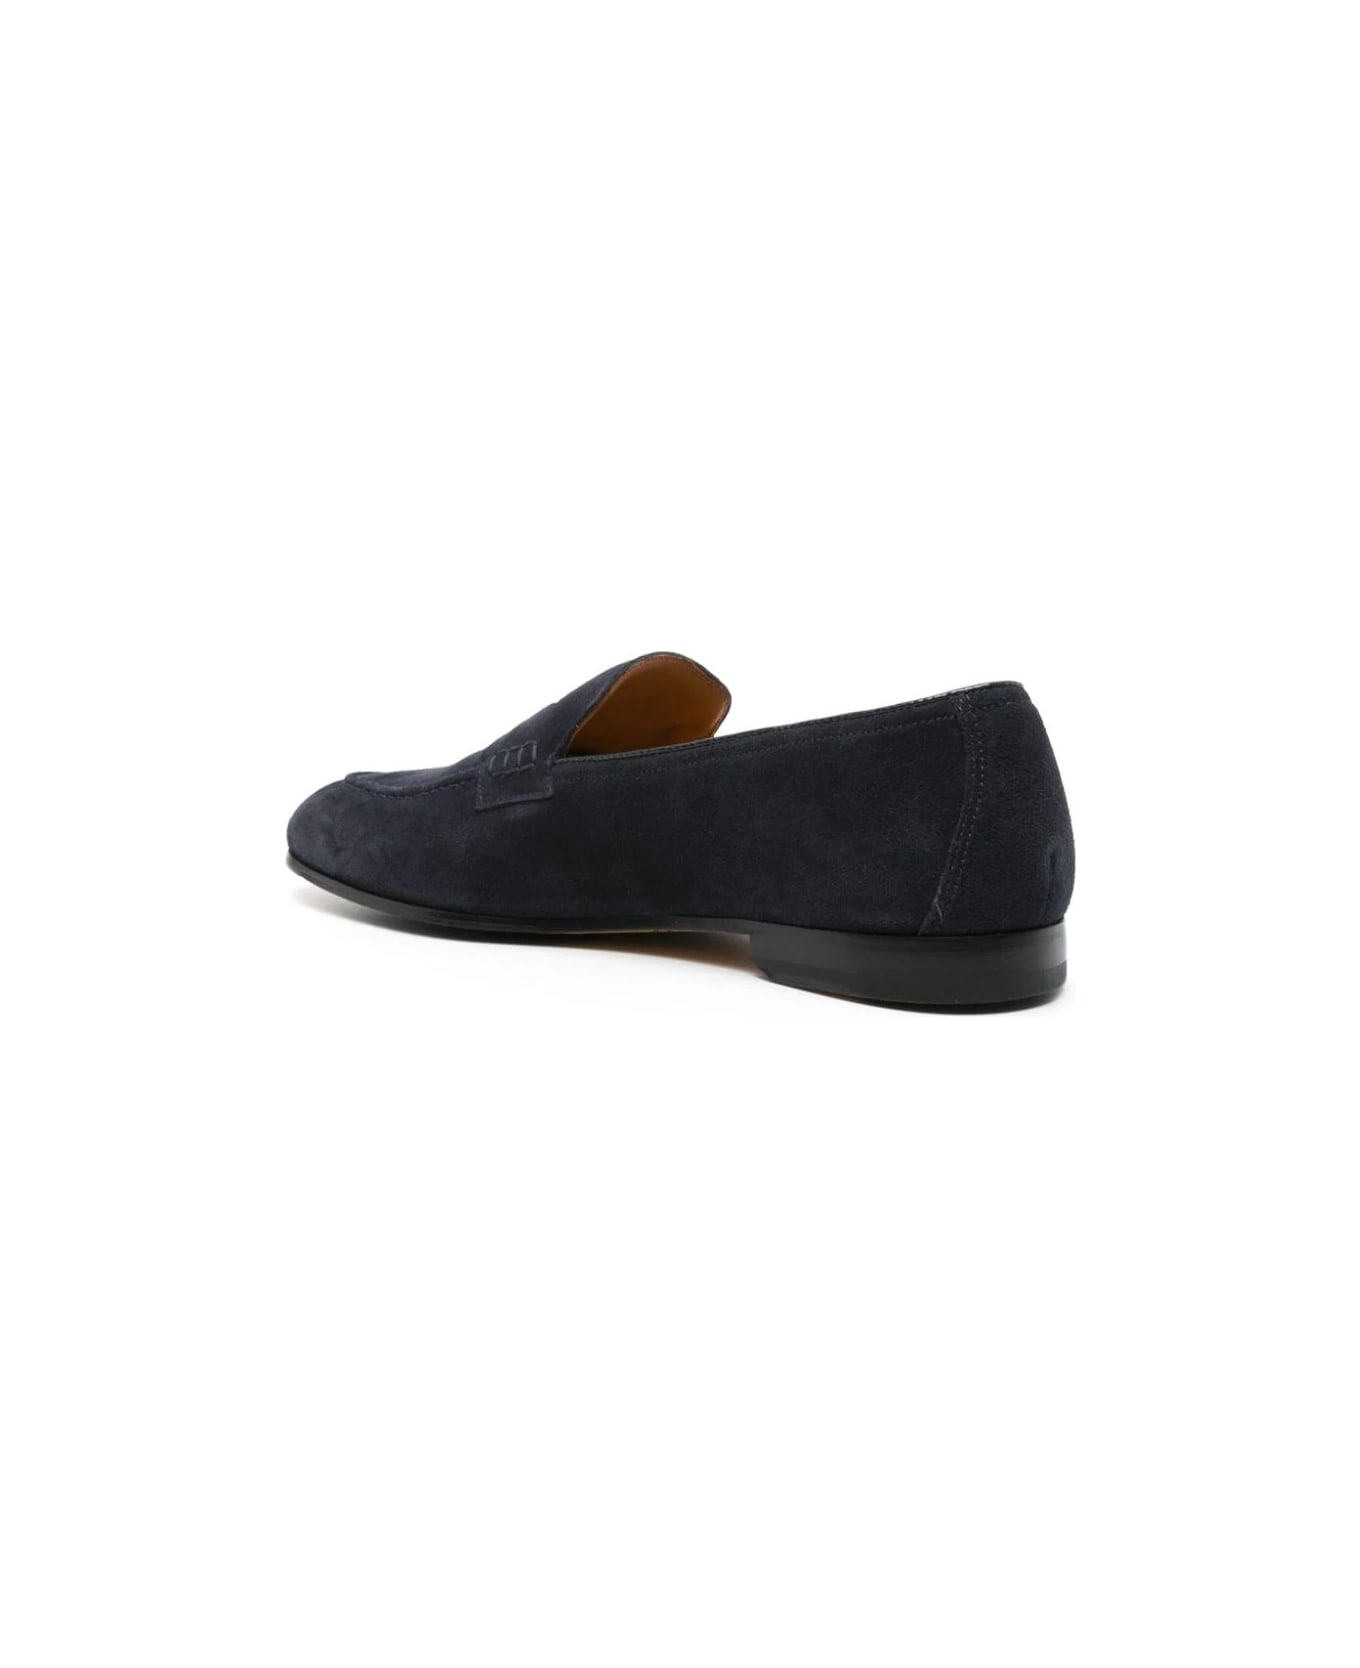 Doucal's Navy Blue Suede Penny Loafers - Blue